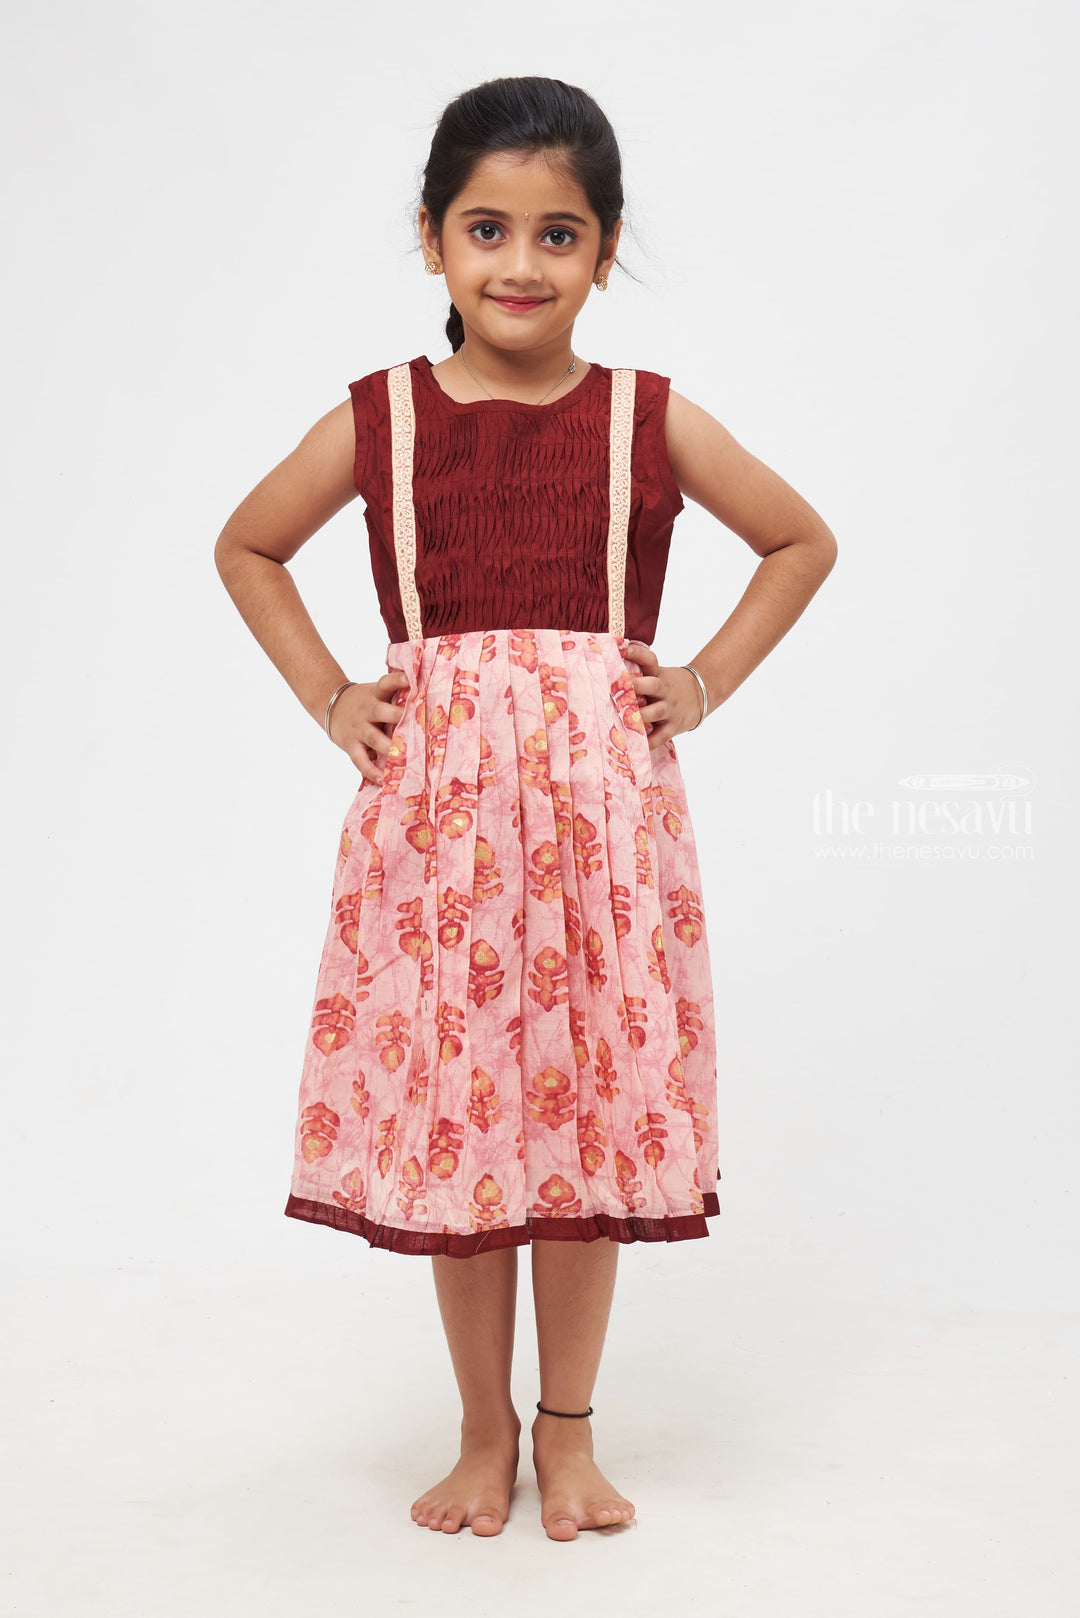 The Nesavu Girls Cotton Frock Pink Peacock Feather Delight with Lace Accents Cotton Frocks for Girls Nesavu 14 (6M) / Pink / Cotton GFC1166B-14 Pink Cotton Dress with Peacock Feather Motifs | Timeless Elegance for Little Girls | The Nesavu